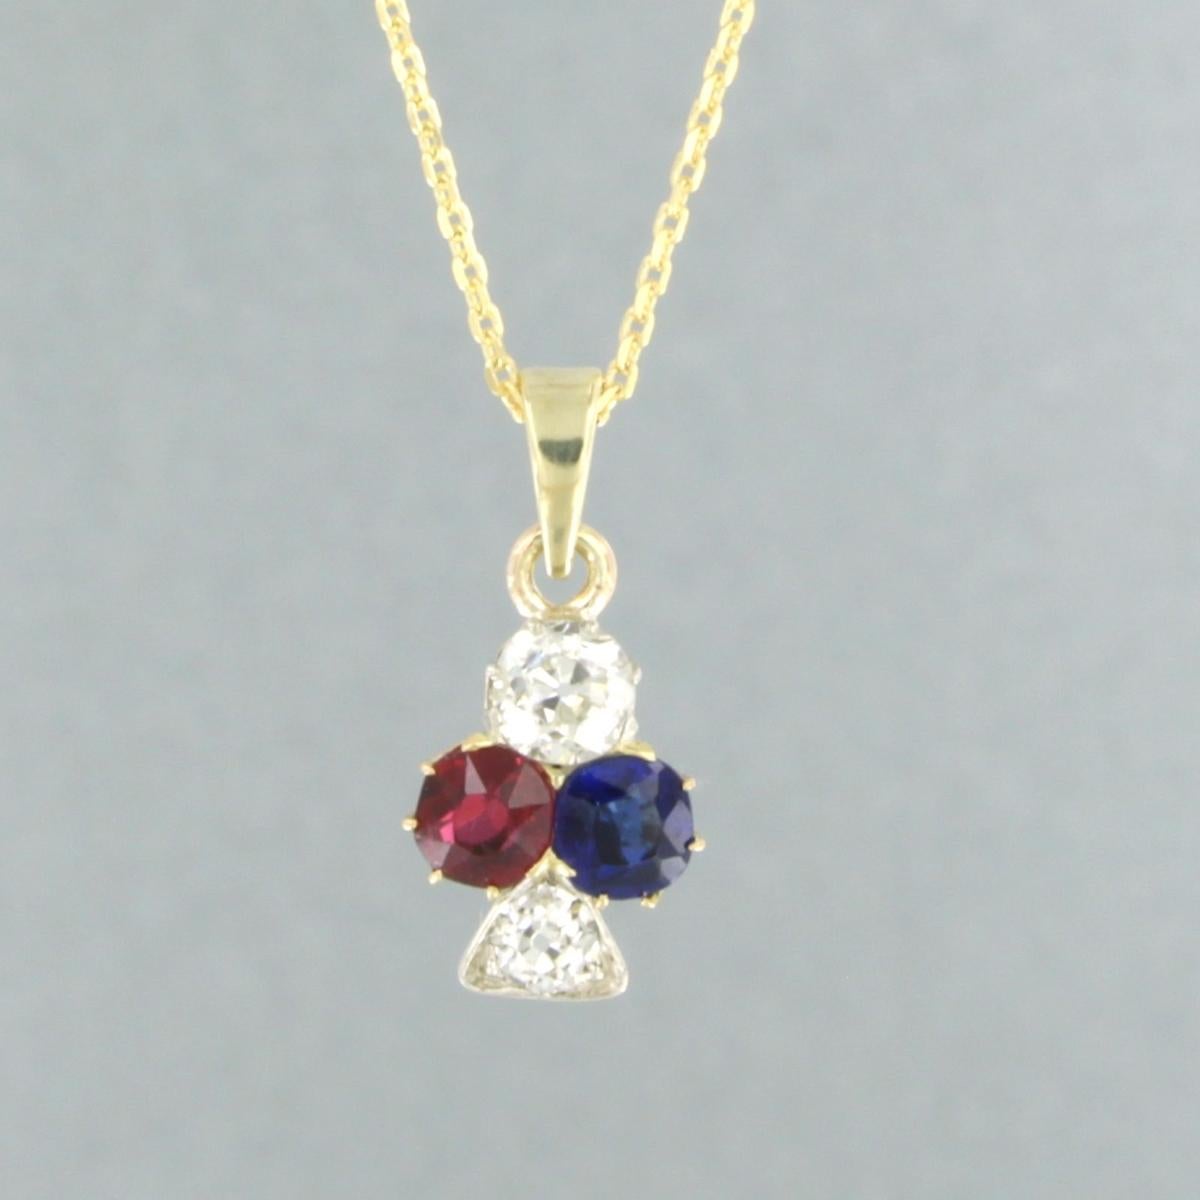 14k yellow gold necklace with a bicolor gold pendant set with ruby, sapphire and old mine cut diamond. 0.50ct - H/I - SI - 45 cm long

detailed description

necklace is 45 cm long and 0.9 mm wide

size of the pendant is approximately 1.8 cm by 9.0